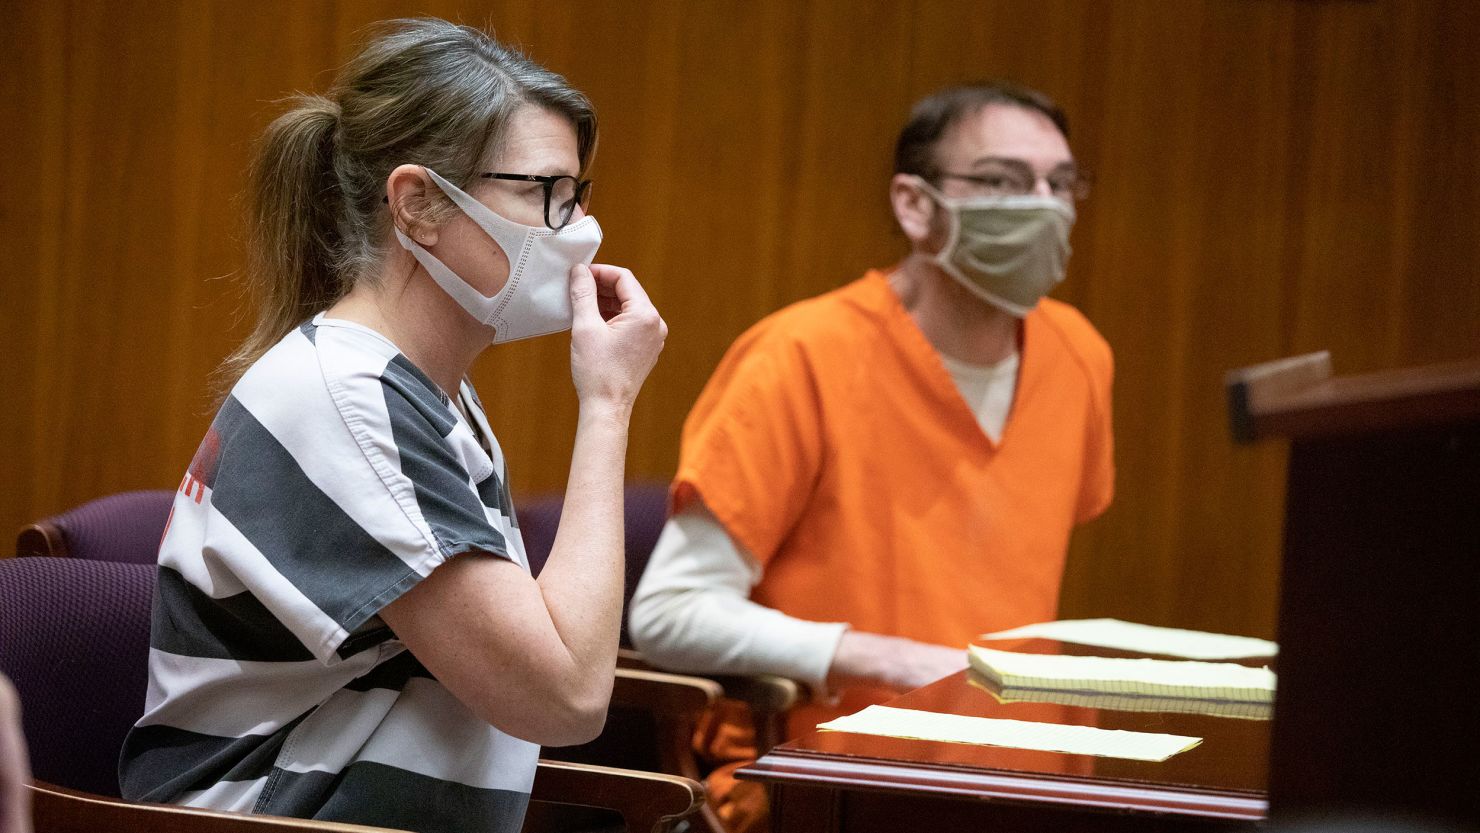 Jennifer Crumbley and her husband James Crumbley appear for their pretrial hearing on March 22, 2022, in Pontiac, Michigan.